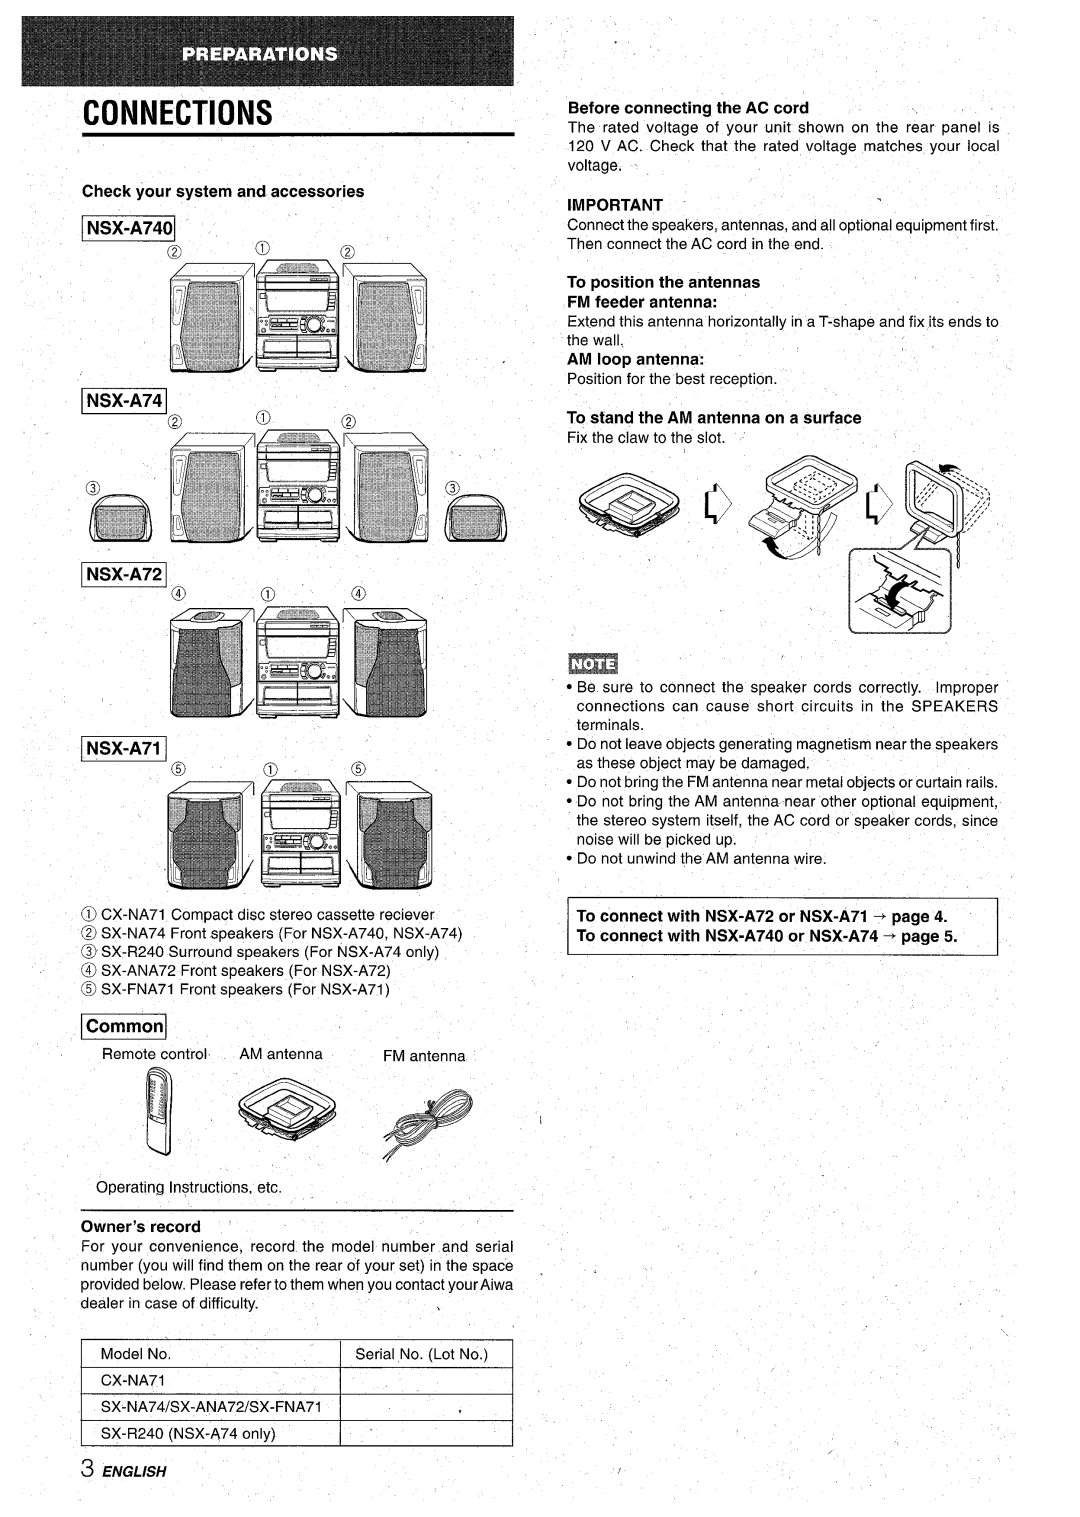 Aiwa CX-NA71 manual Connections, EiiEa, Check your system and accessories, Before connecting the AC cord, Owner’s record ~ 